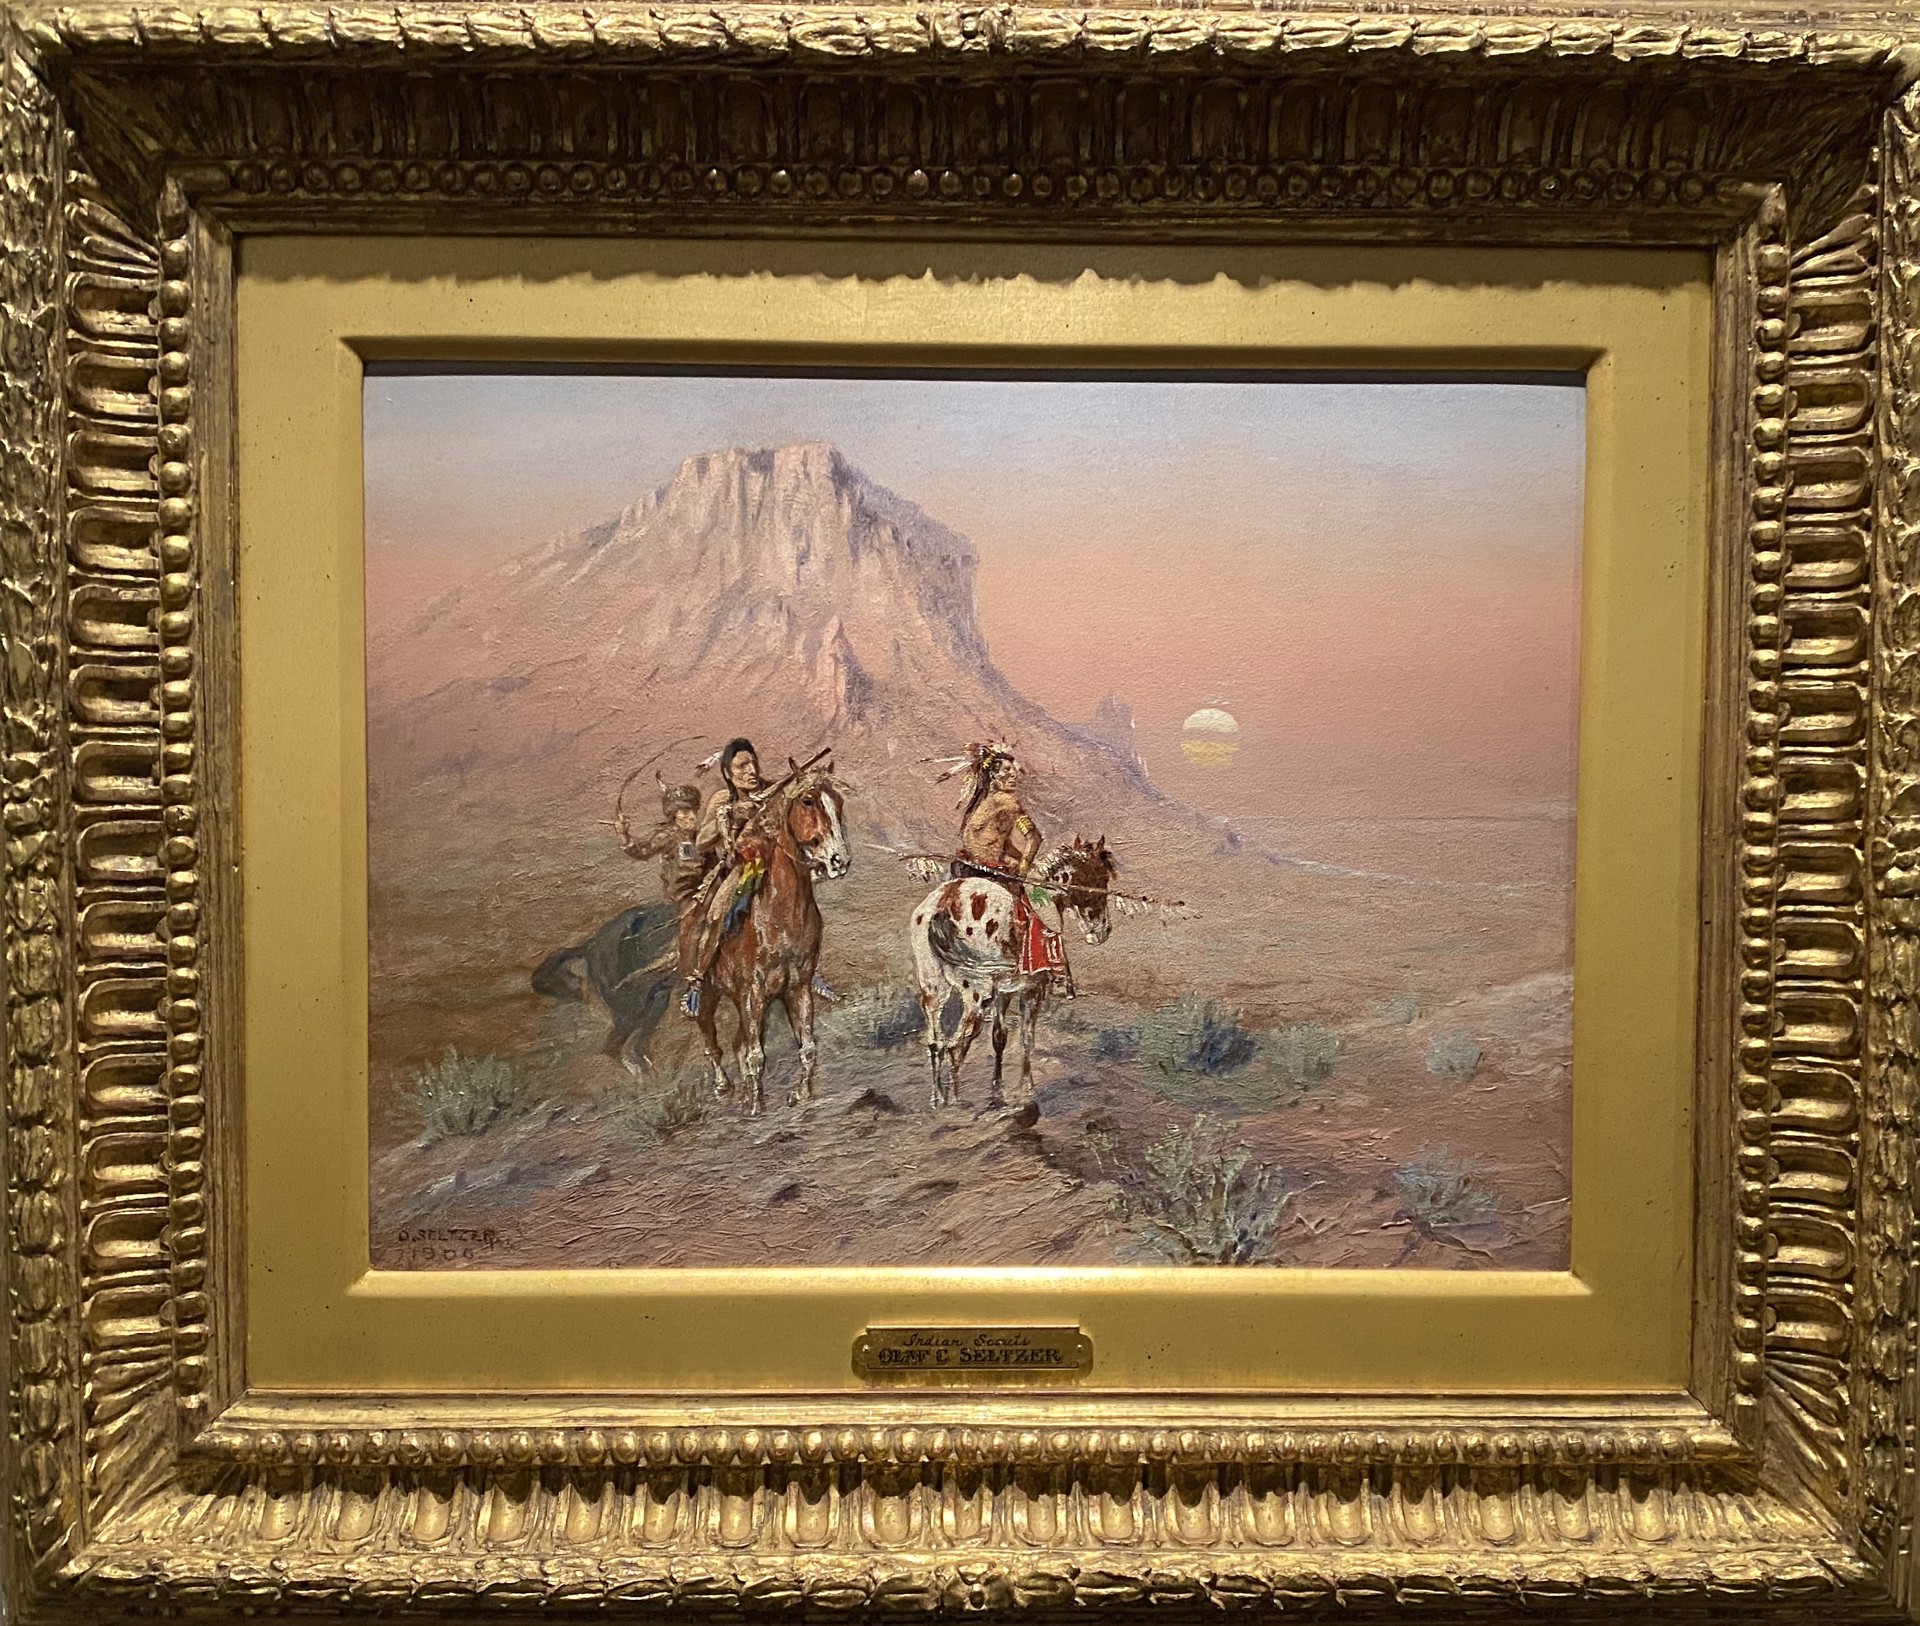 INDIAN SCOUTS by O.C. Seltzer [1877–1957]